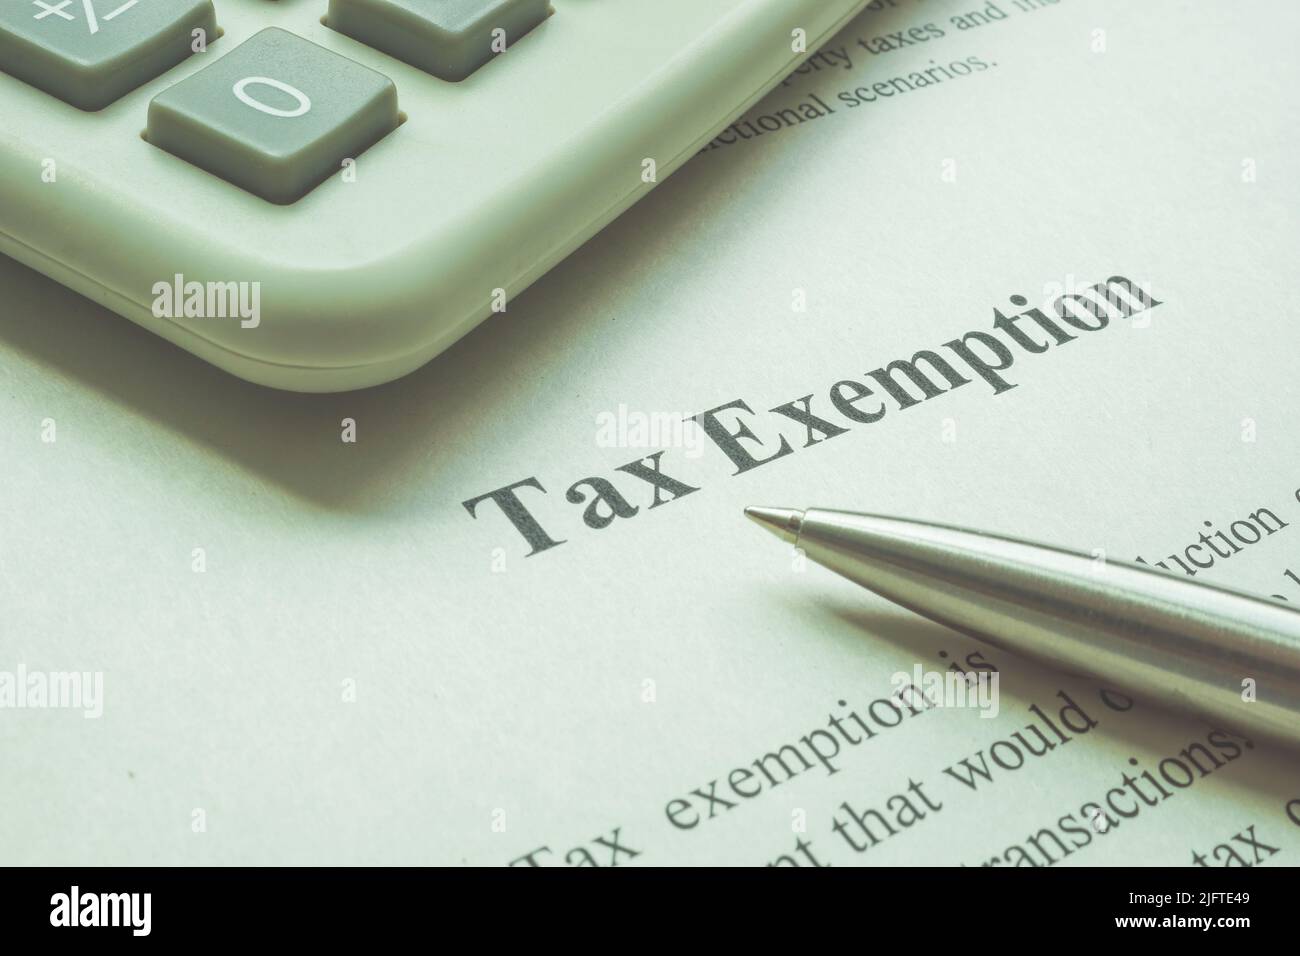 Info about tax exemption with calculator and pen. Stock Photo